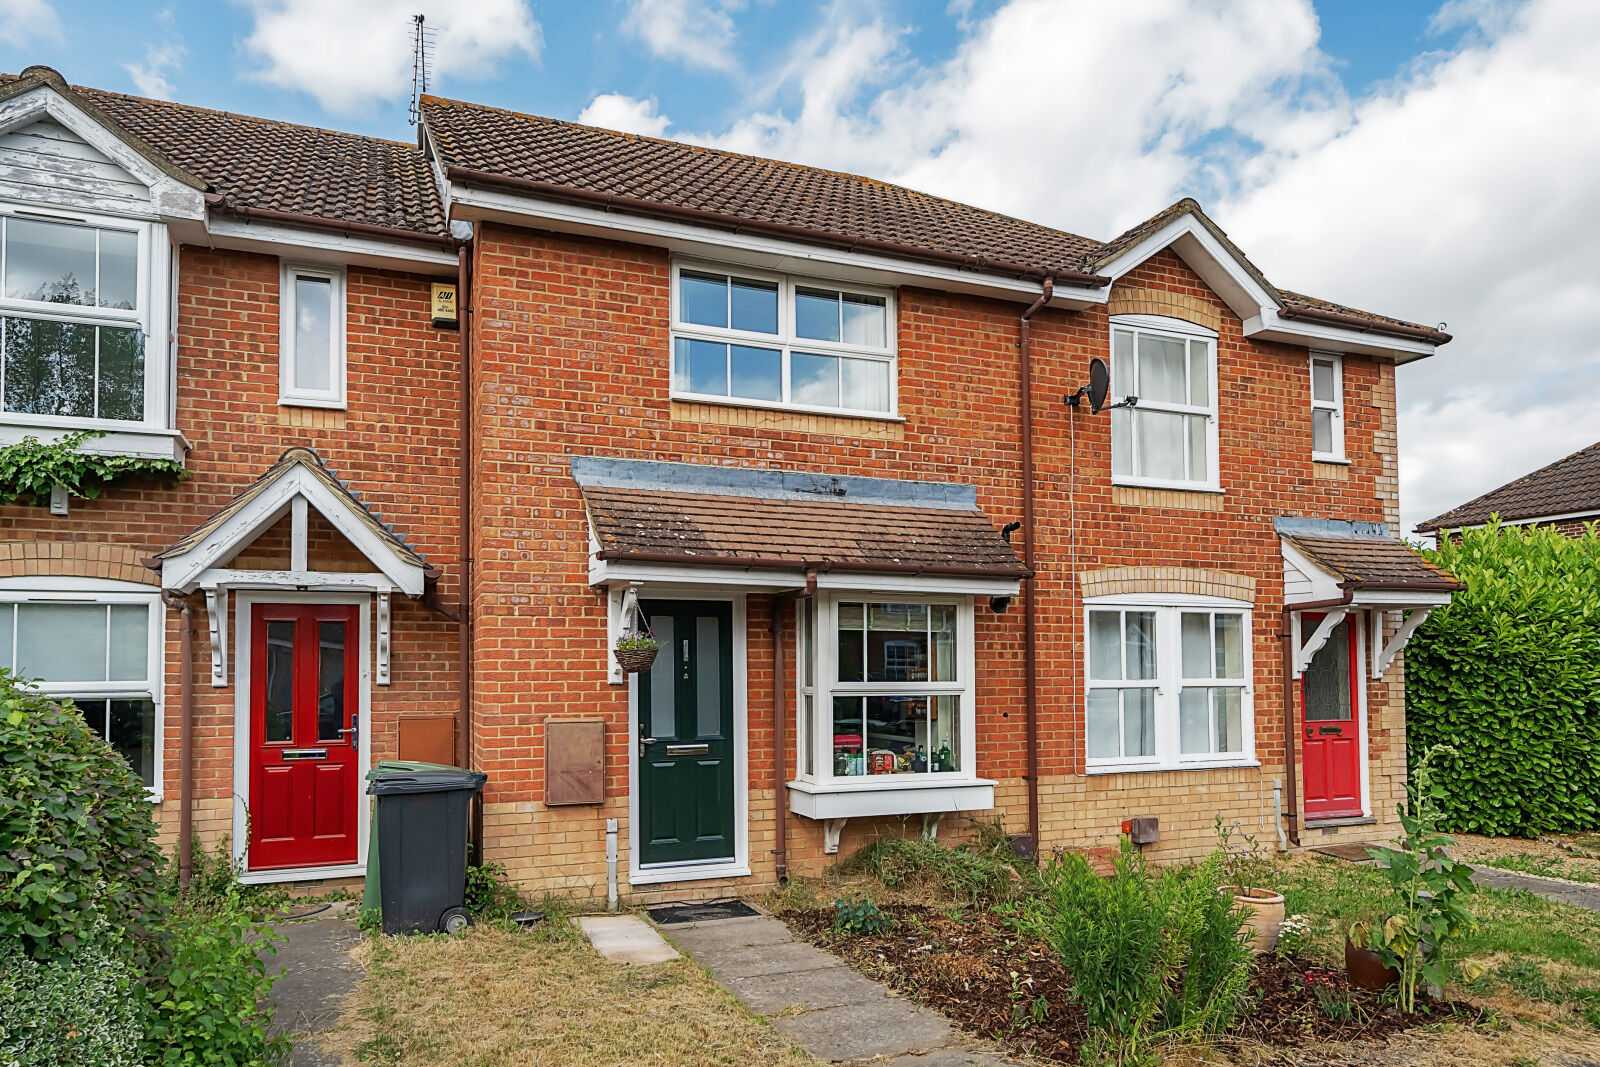 2 bedroom mid terraced house for sale Dulas Close, Didcot, OX11, main image